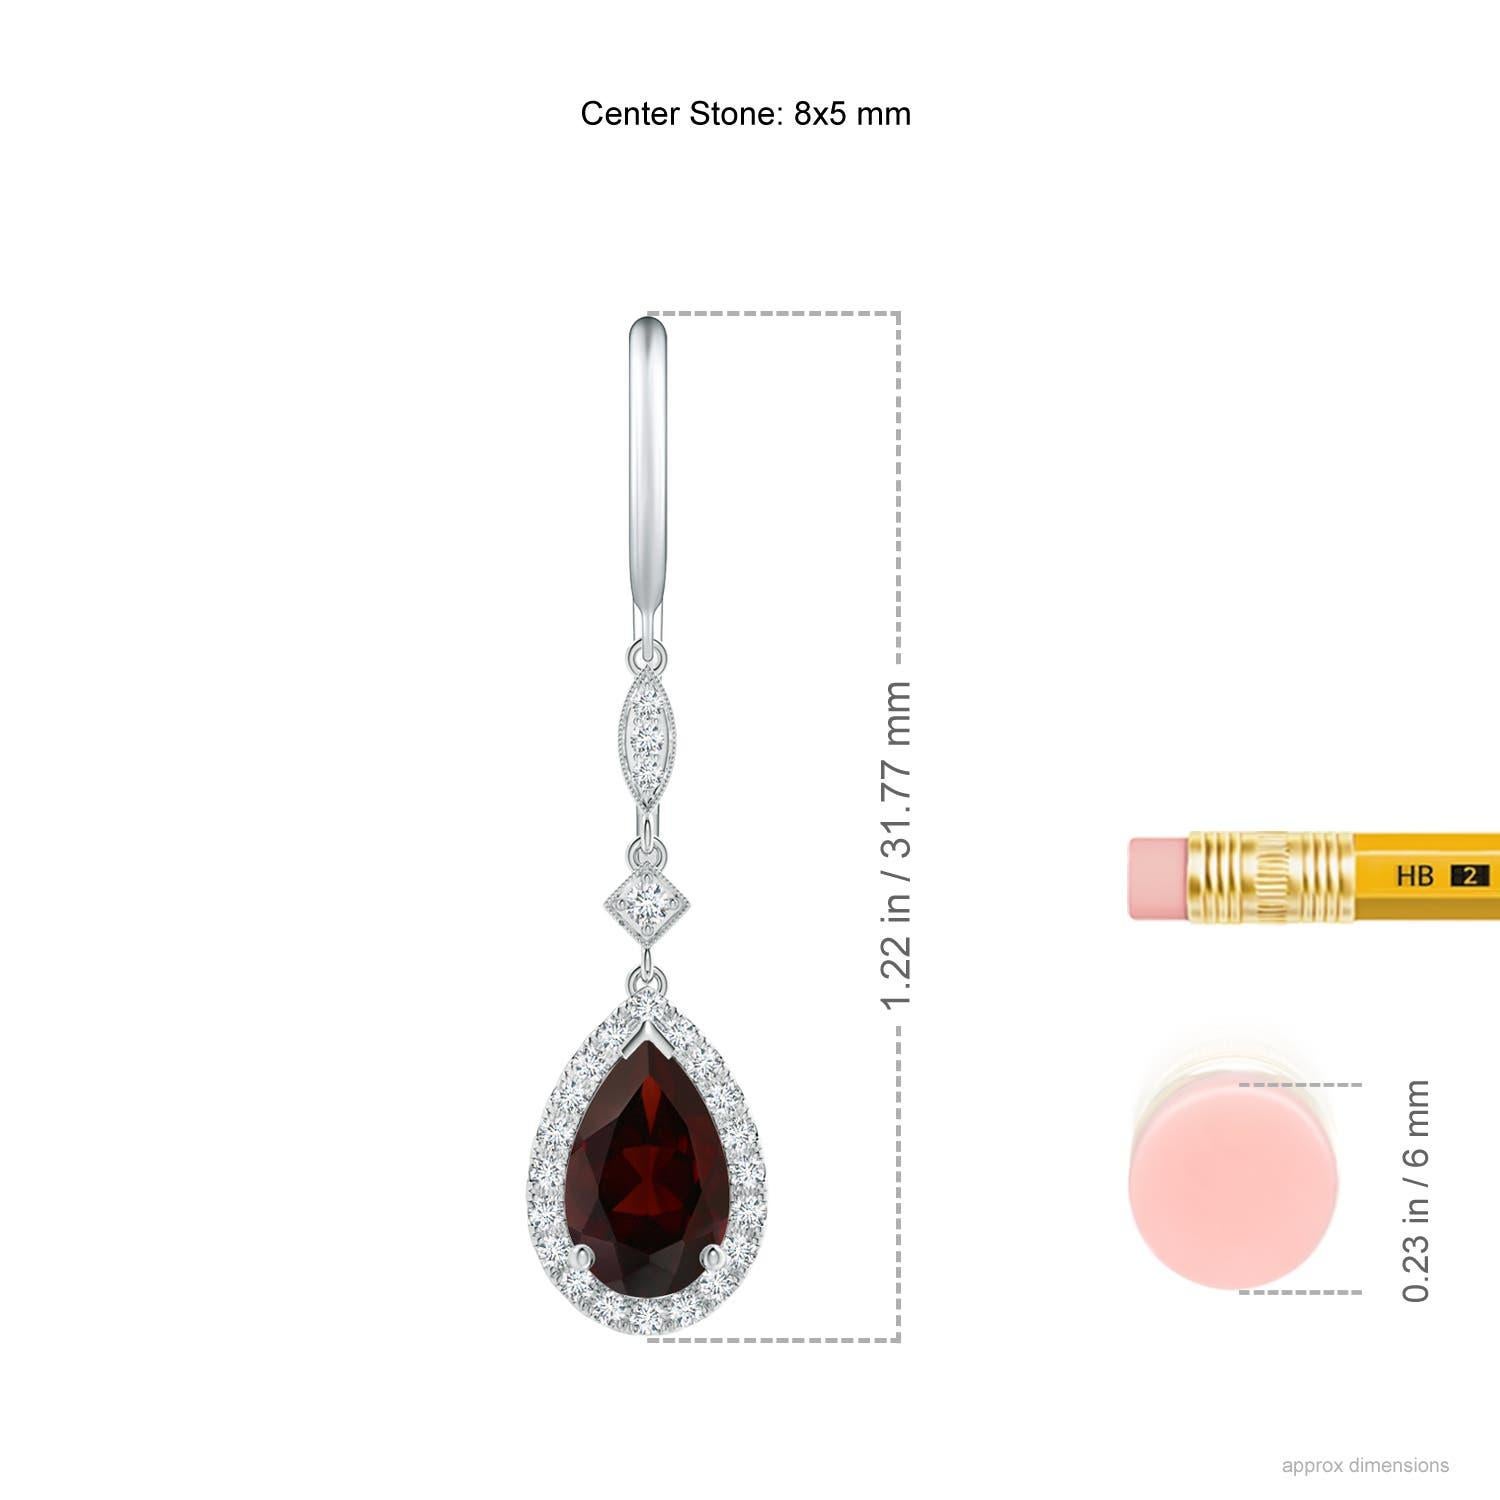 Dangling from shepherd hooks are these beautifully crafted garnet dangle earrings in 14K white gold. Pear-shaped garnets are illuminated by a halo of precious white diamonds that create a remarkable contrast. They are connected to station diamonds